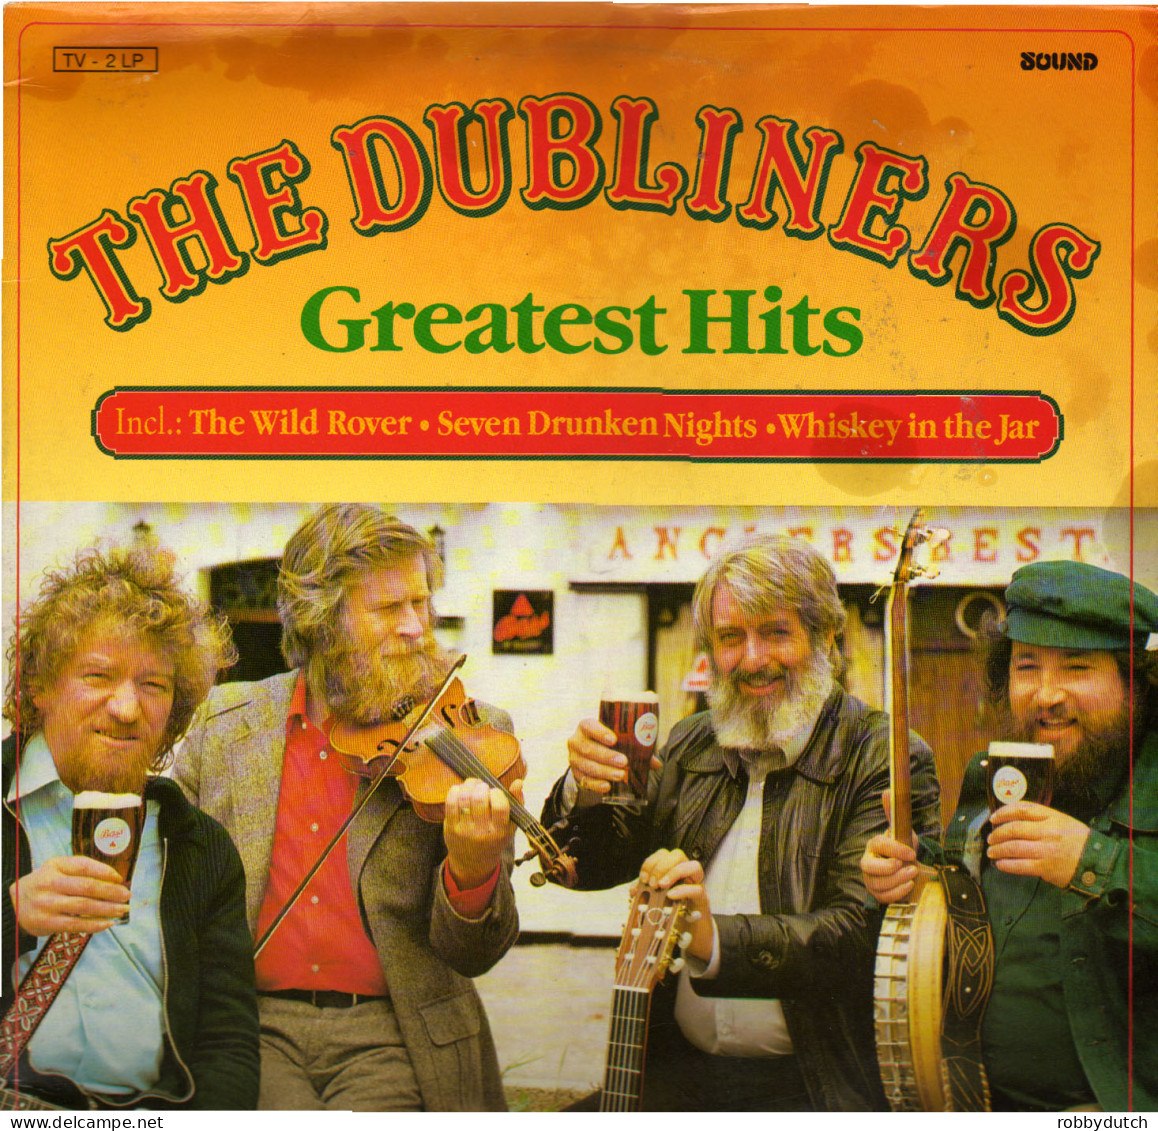 * 2LP *  The DUBLINERS - GREATEST HITS (Holland 1989 EX) - Country & Folk